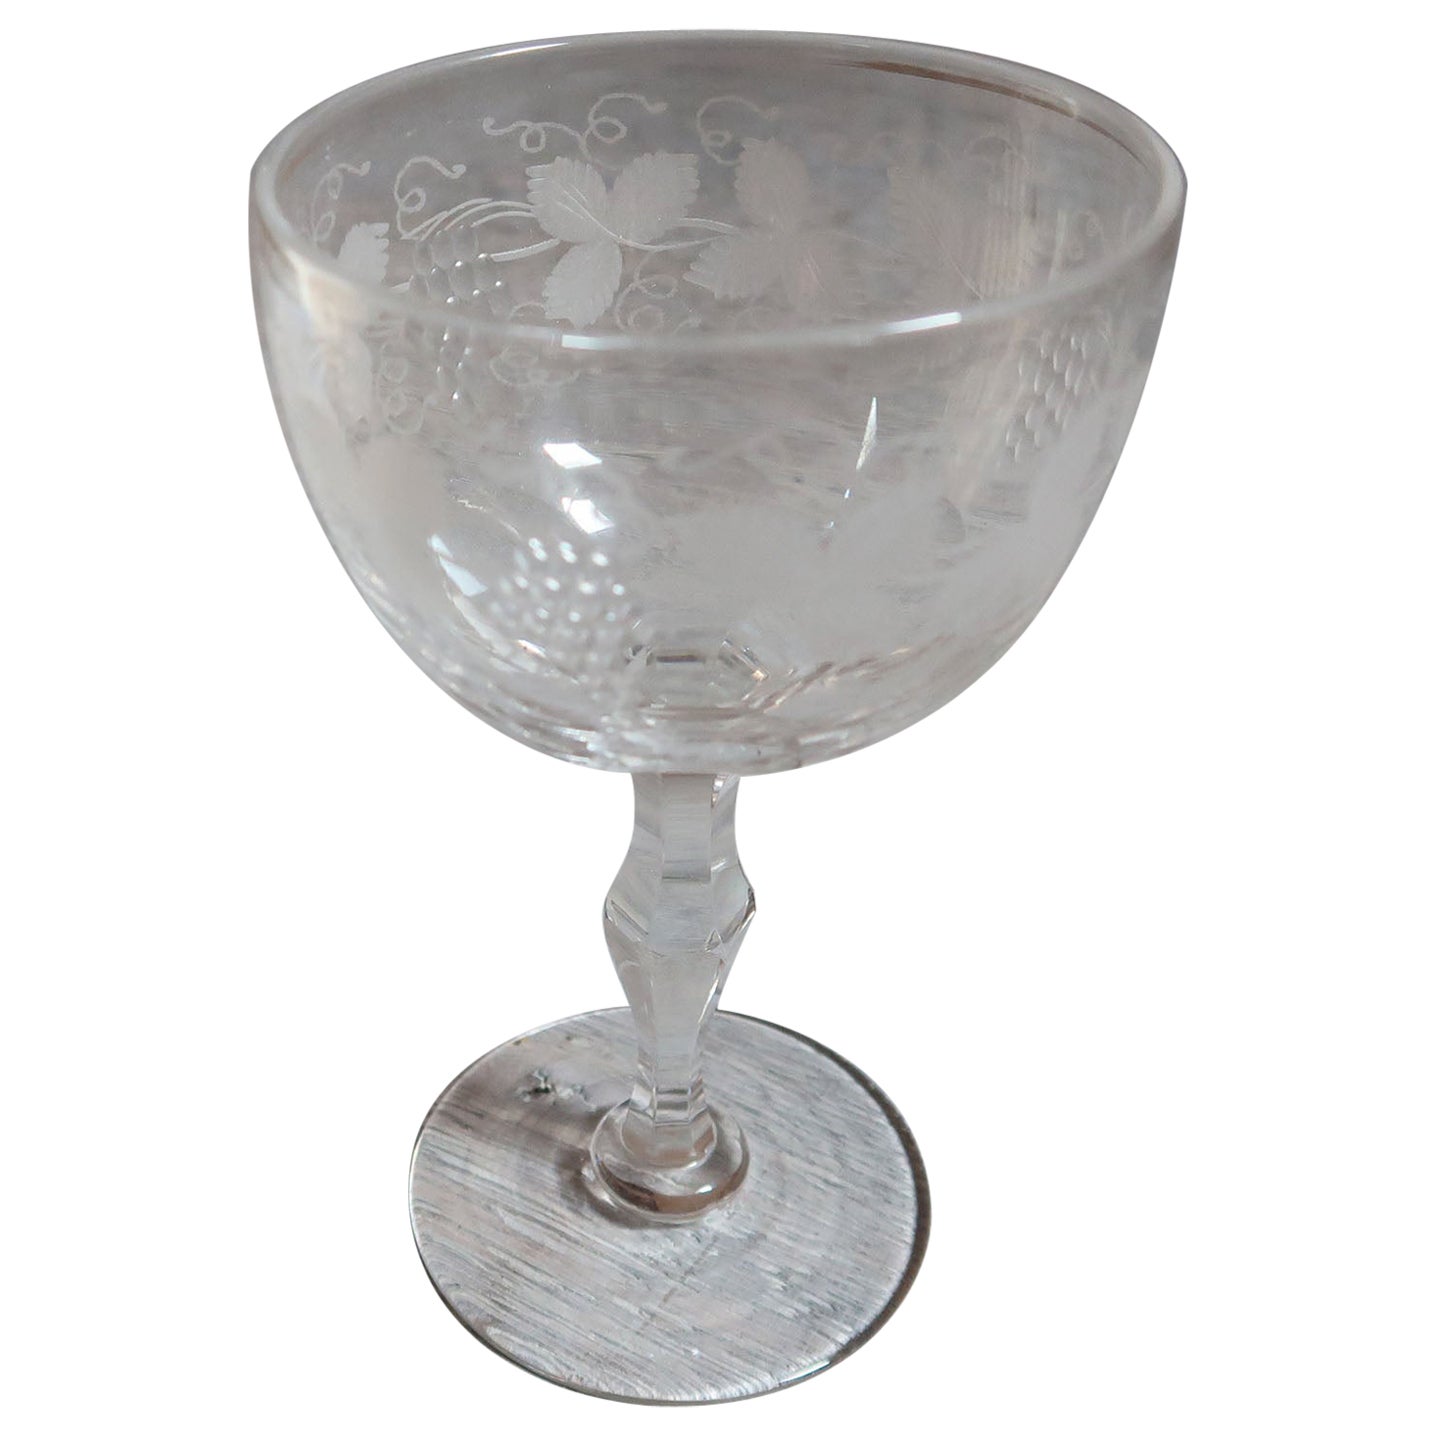 Antique Glass with Grape and Vine Decoration, English, C.1900 For Sale